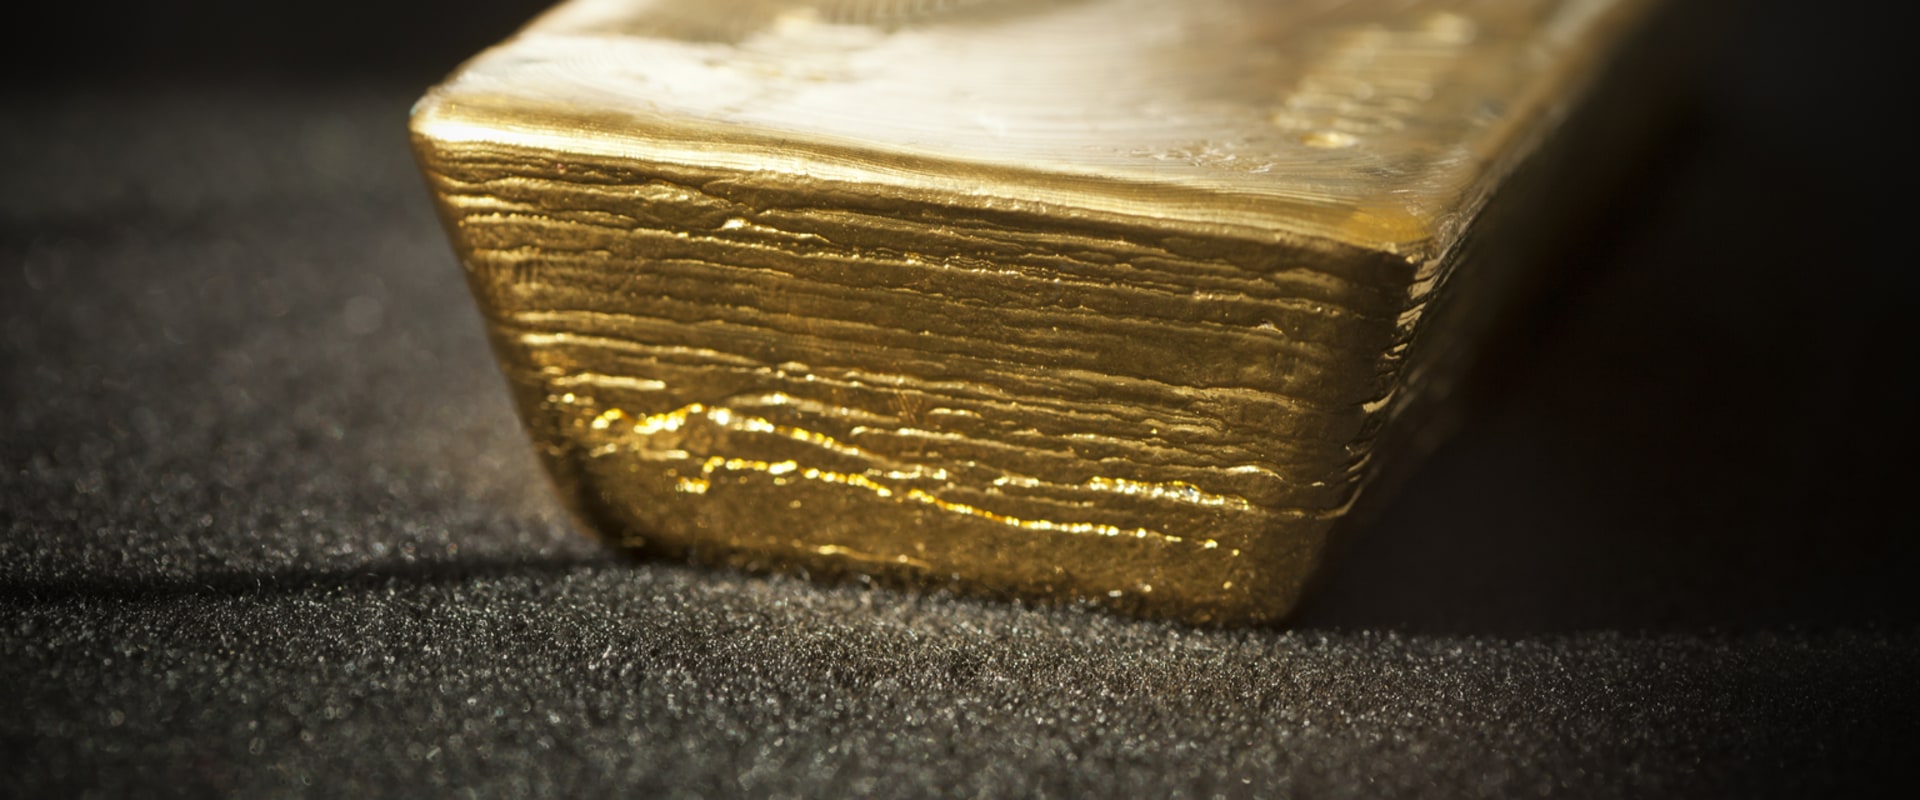 Does it matter what type of gold you buy?